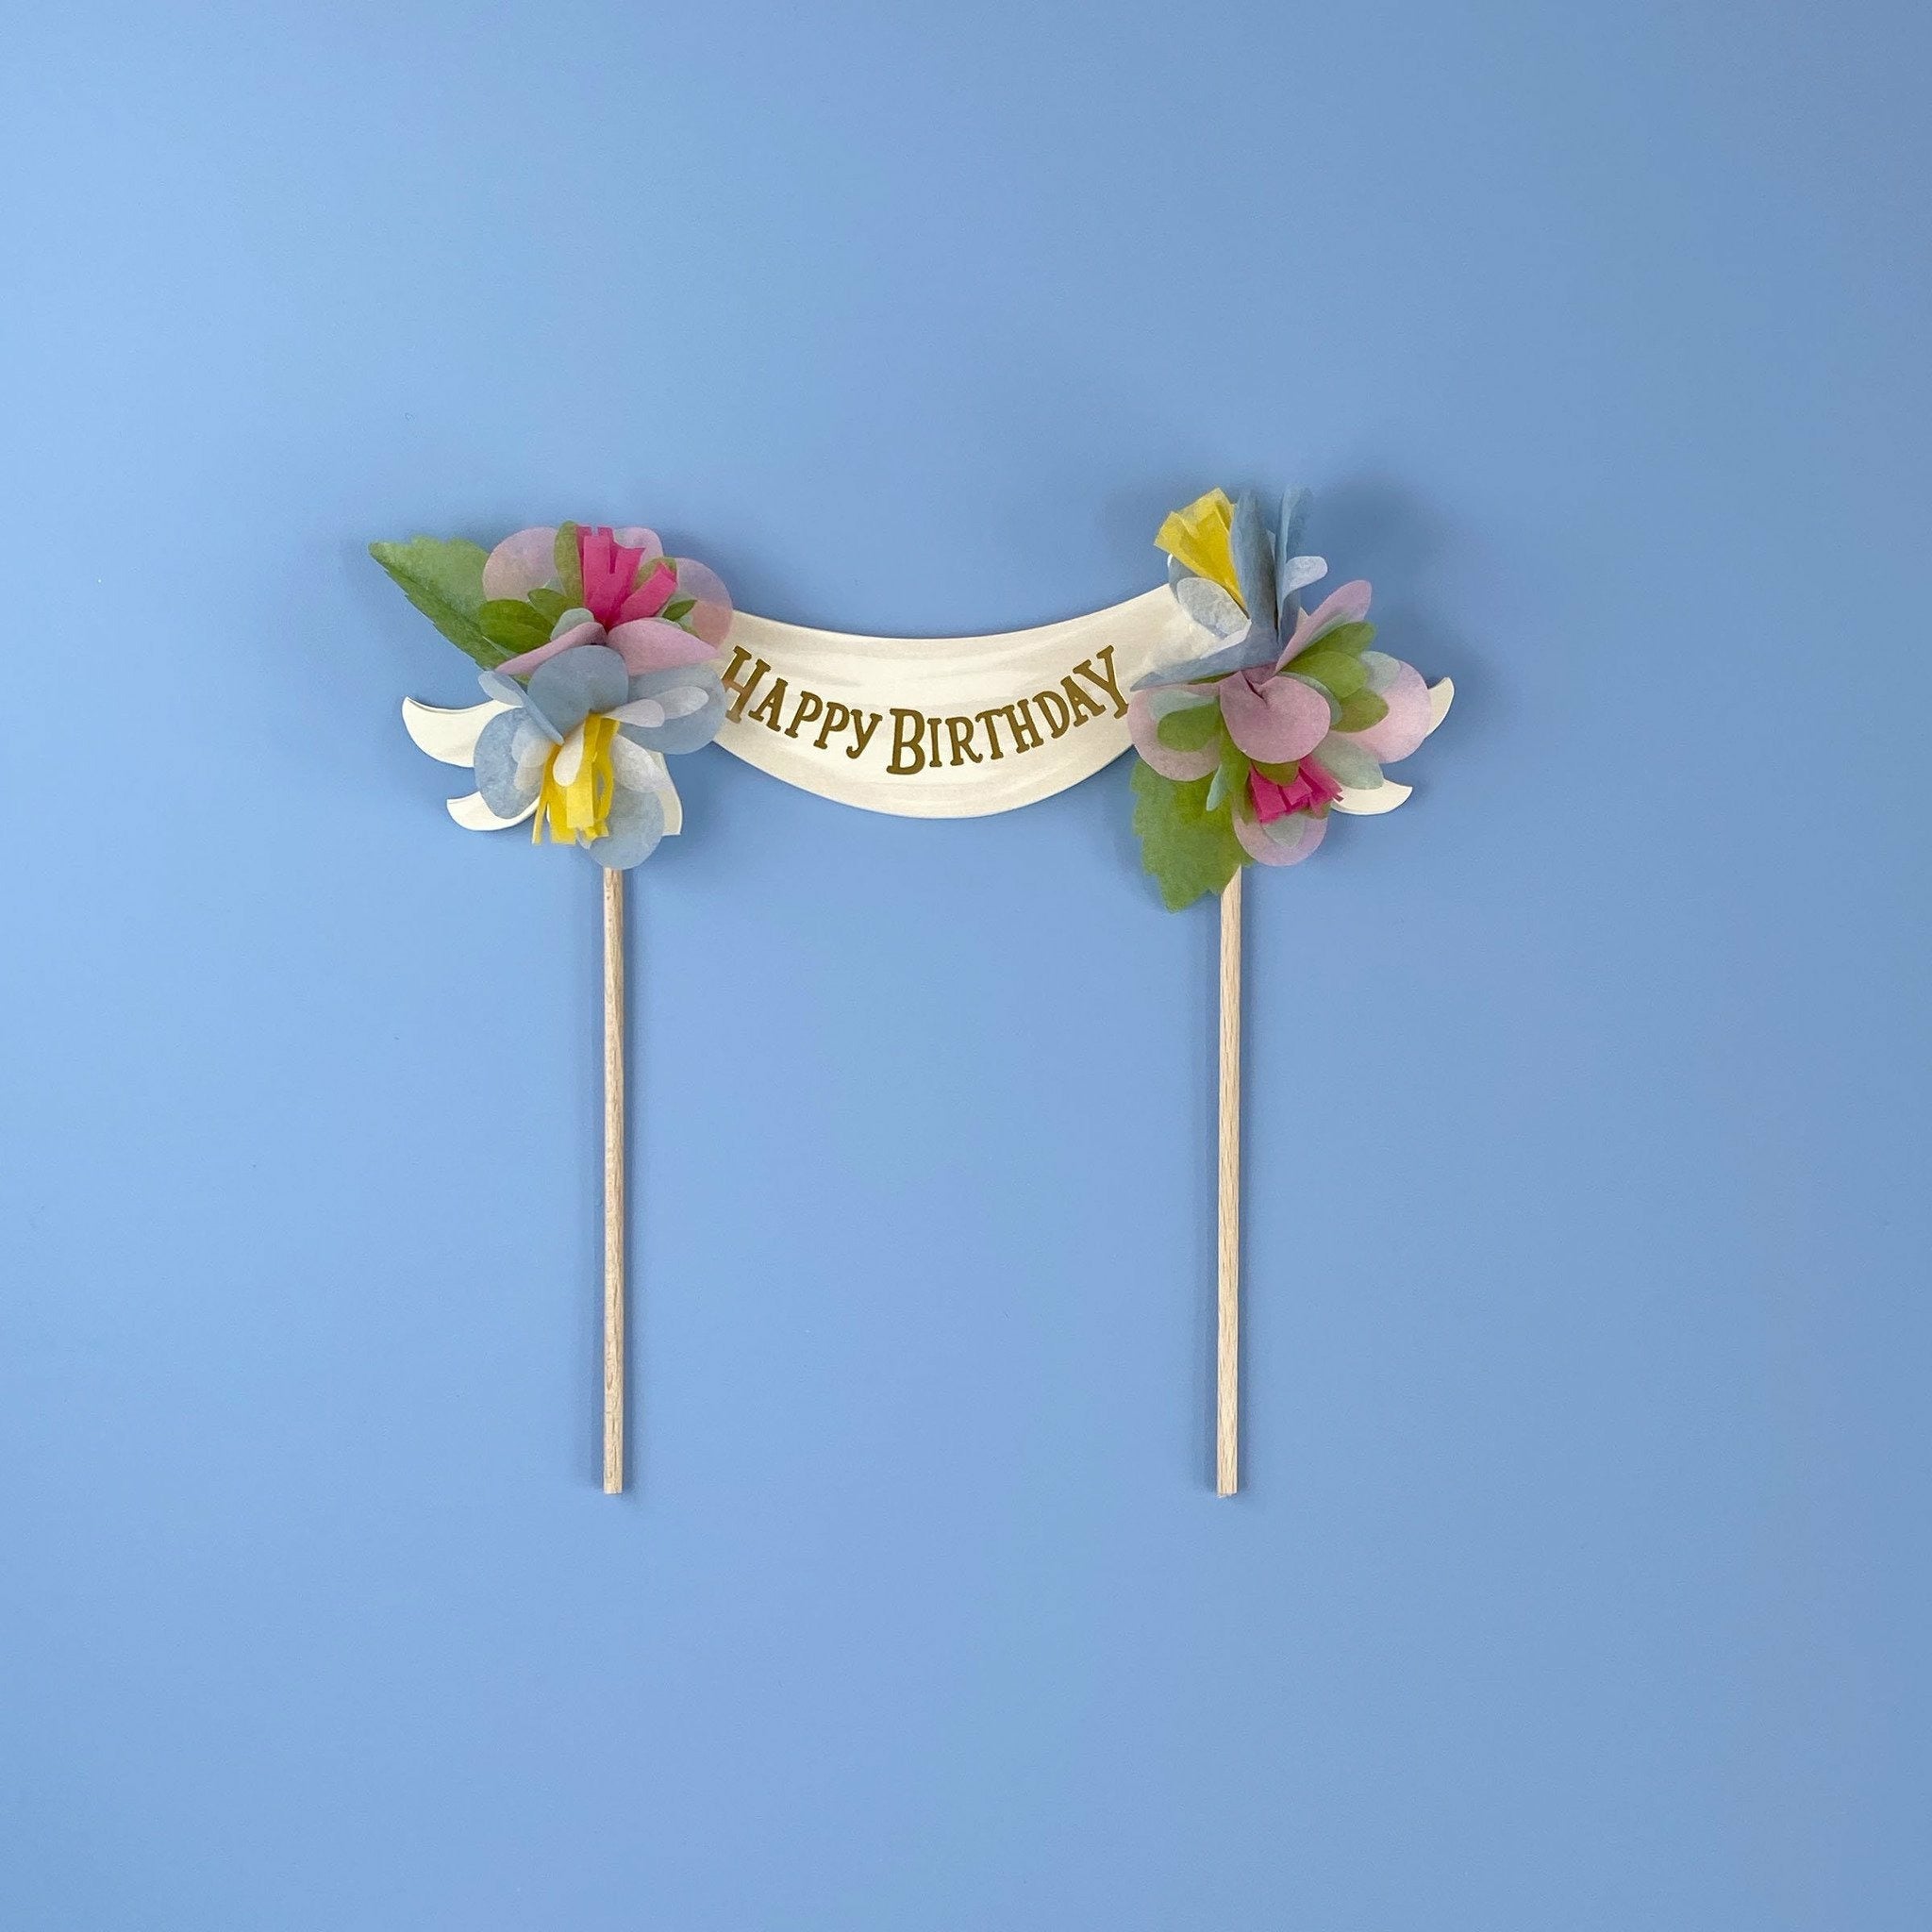 Happy Birthday Cake Topper Multi-Color by The First Snow - The First Snow